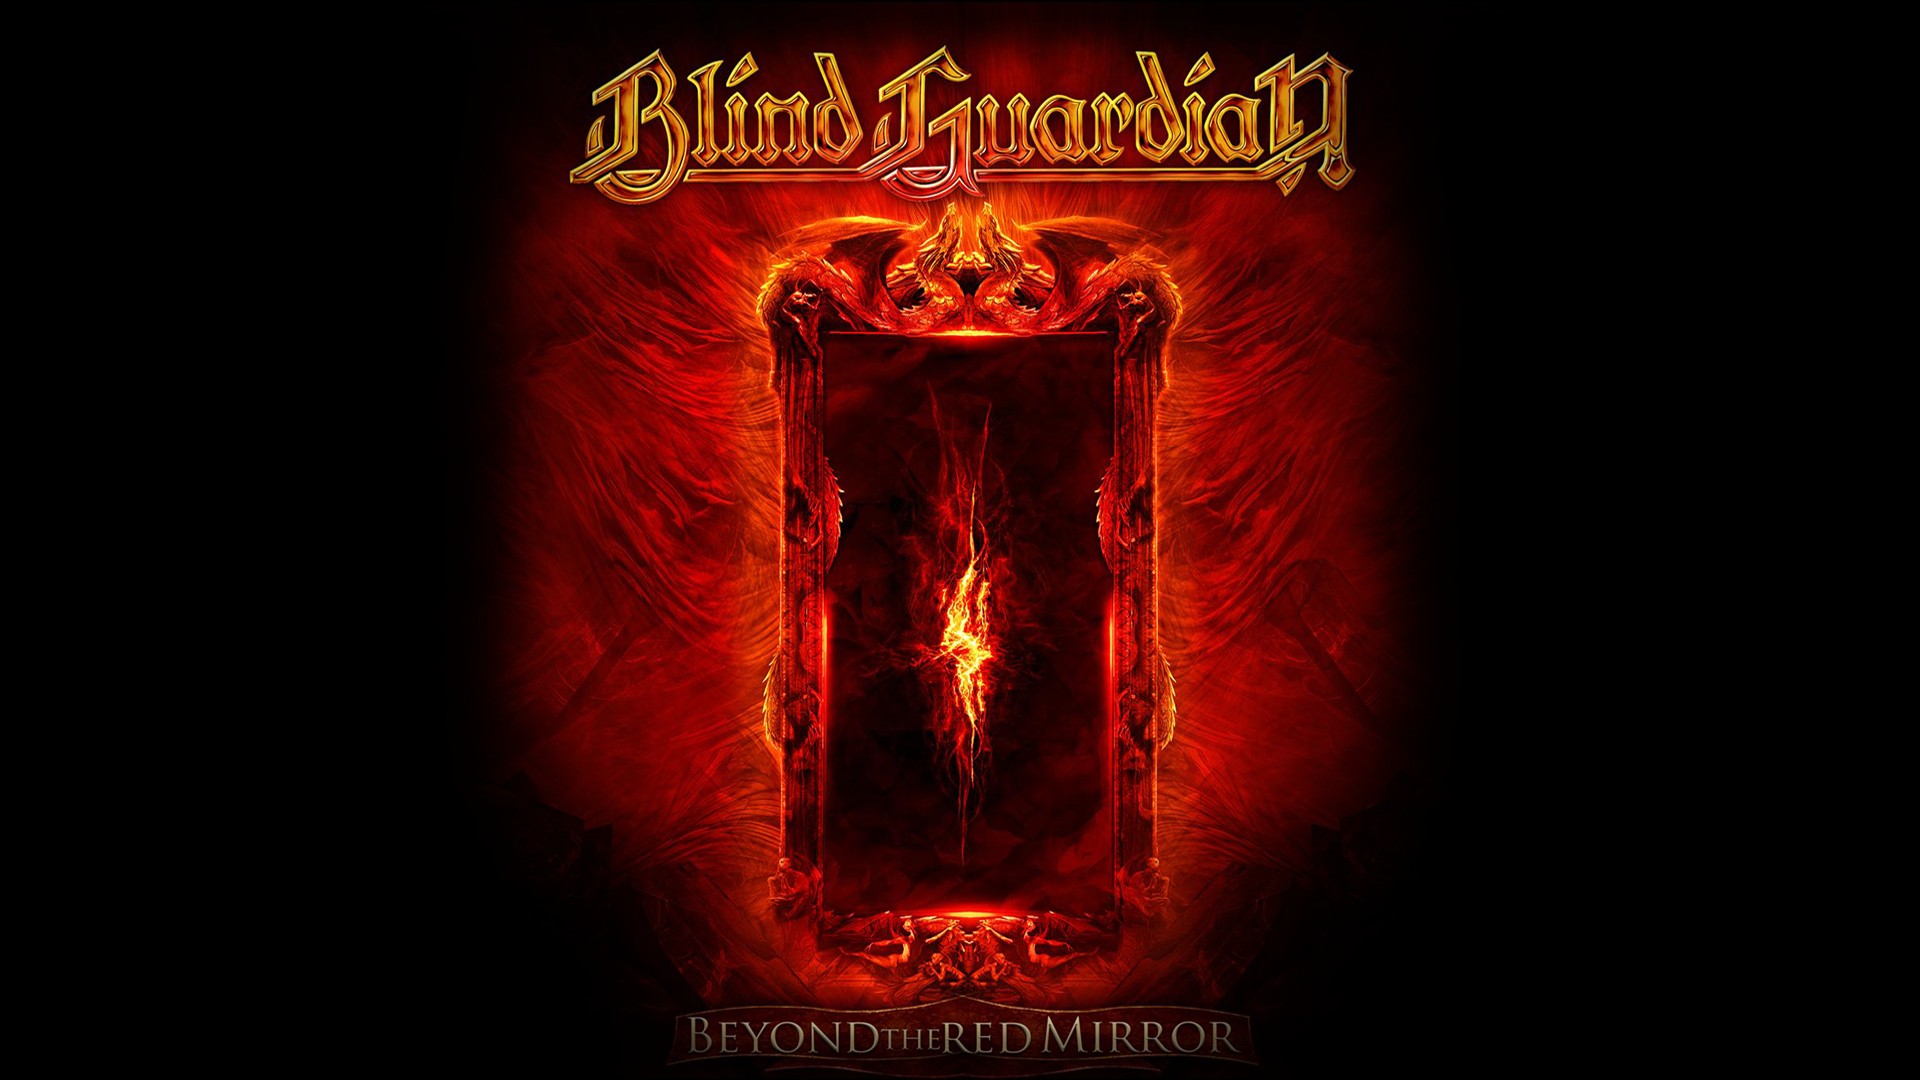 Beyond the red mirror, Blind Guardian, Fan art, Band, Album covers Wallpaper